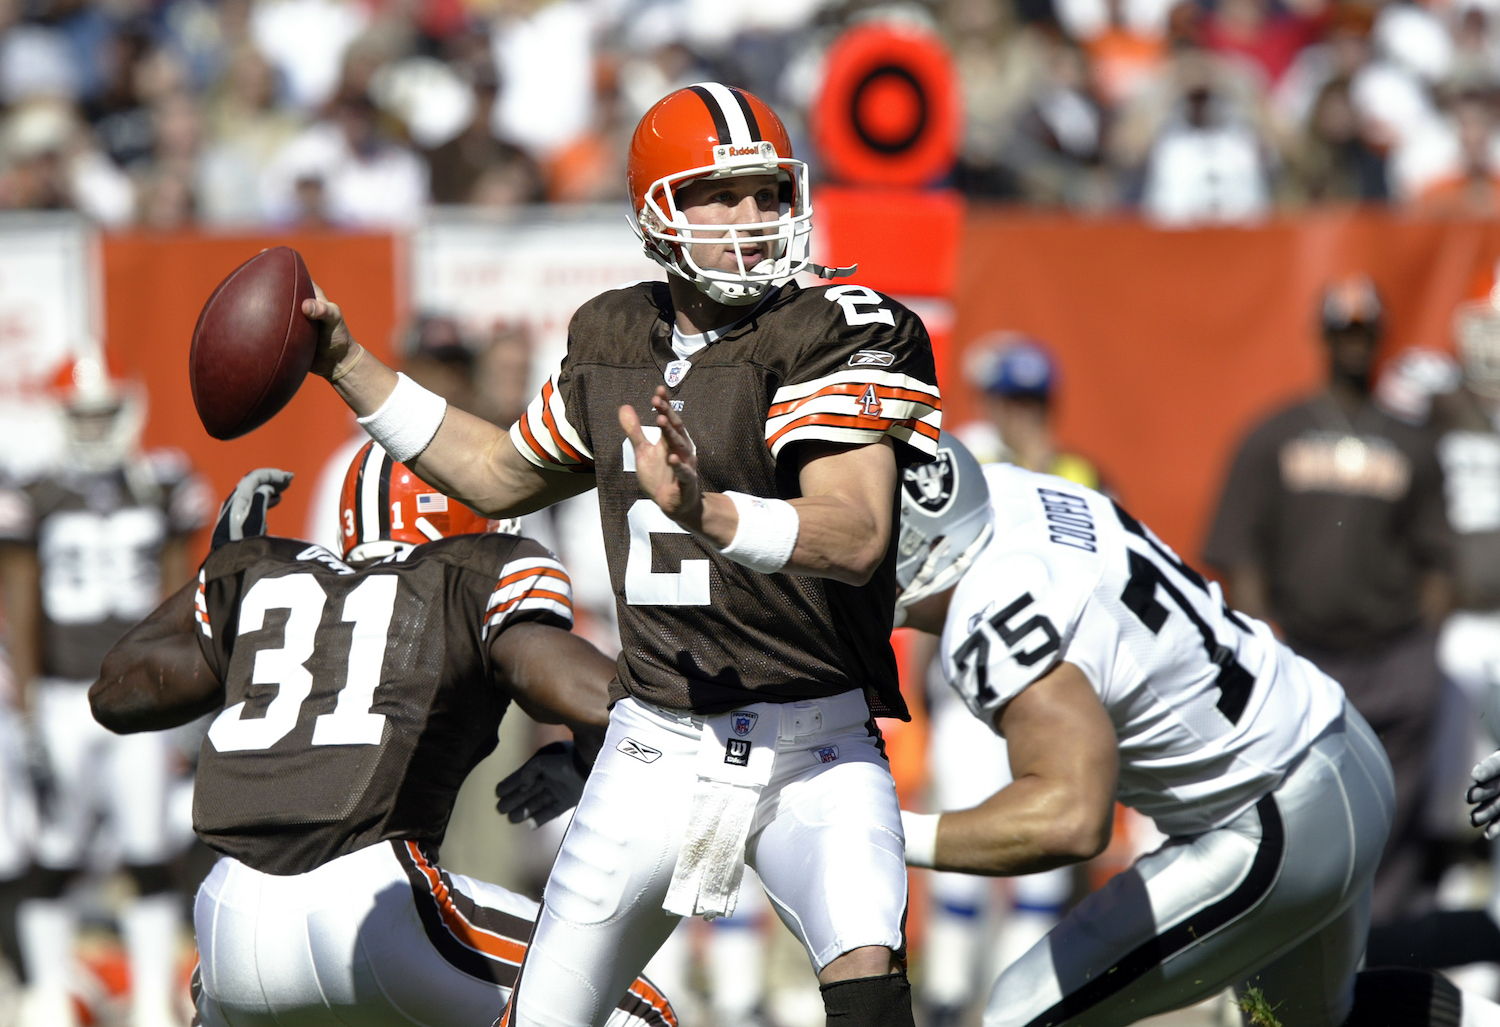 Quarterback Tim Couch of the Cleveland Browns